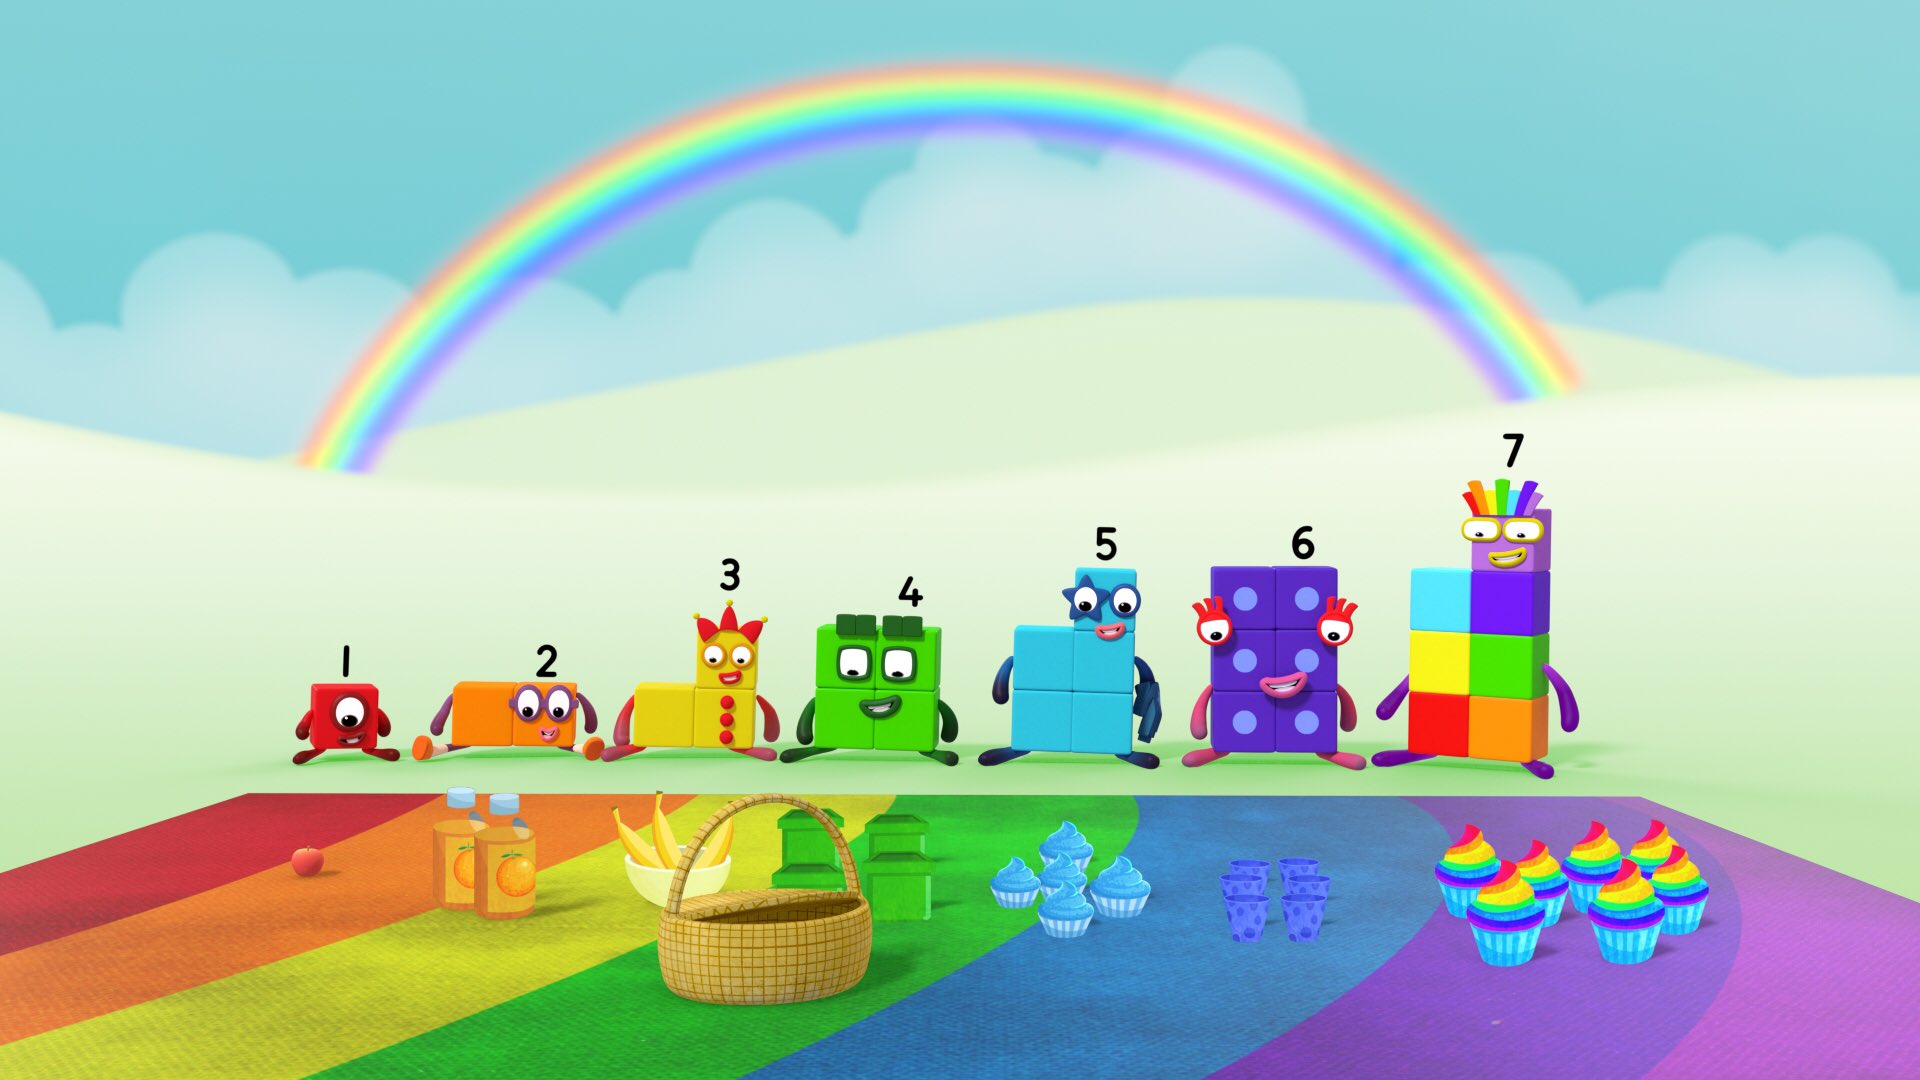 Numberblocks Ar Twitter “🌈 Numberblock Seven 7️⃣ Says Thank You For